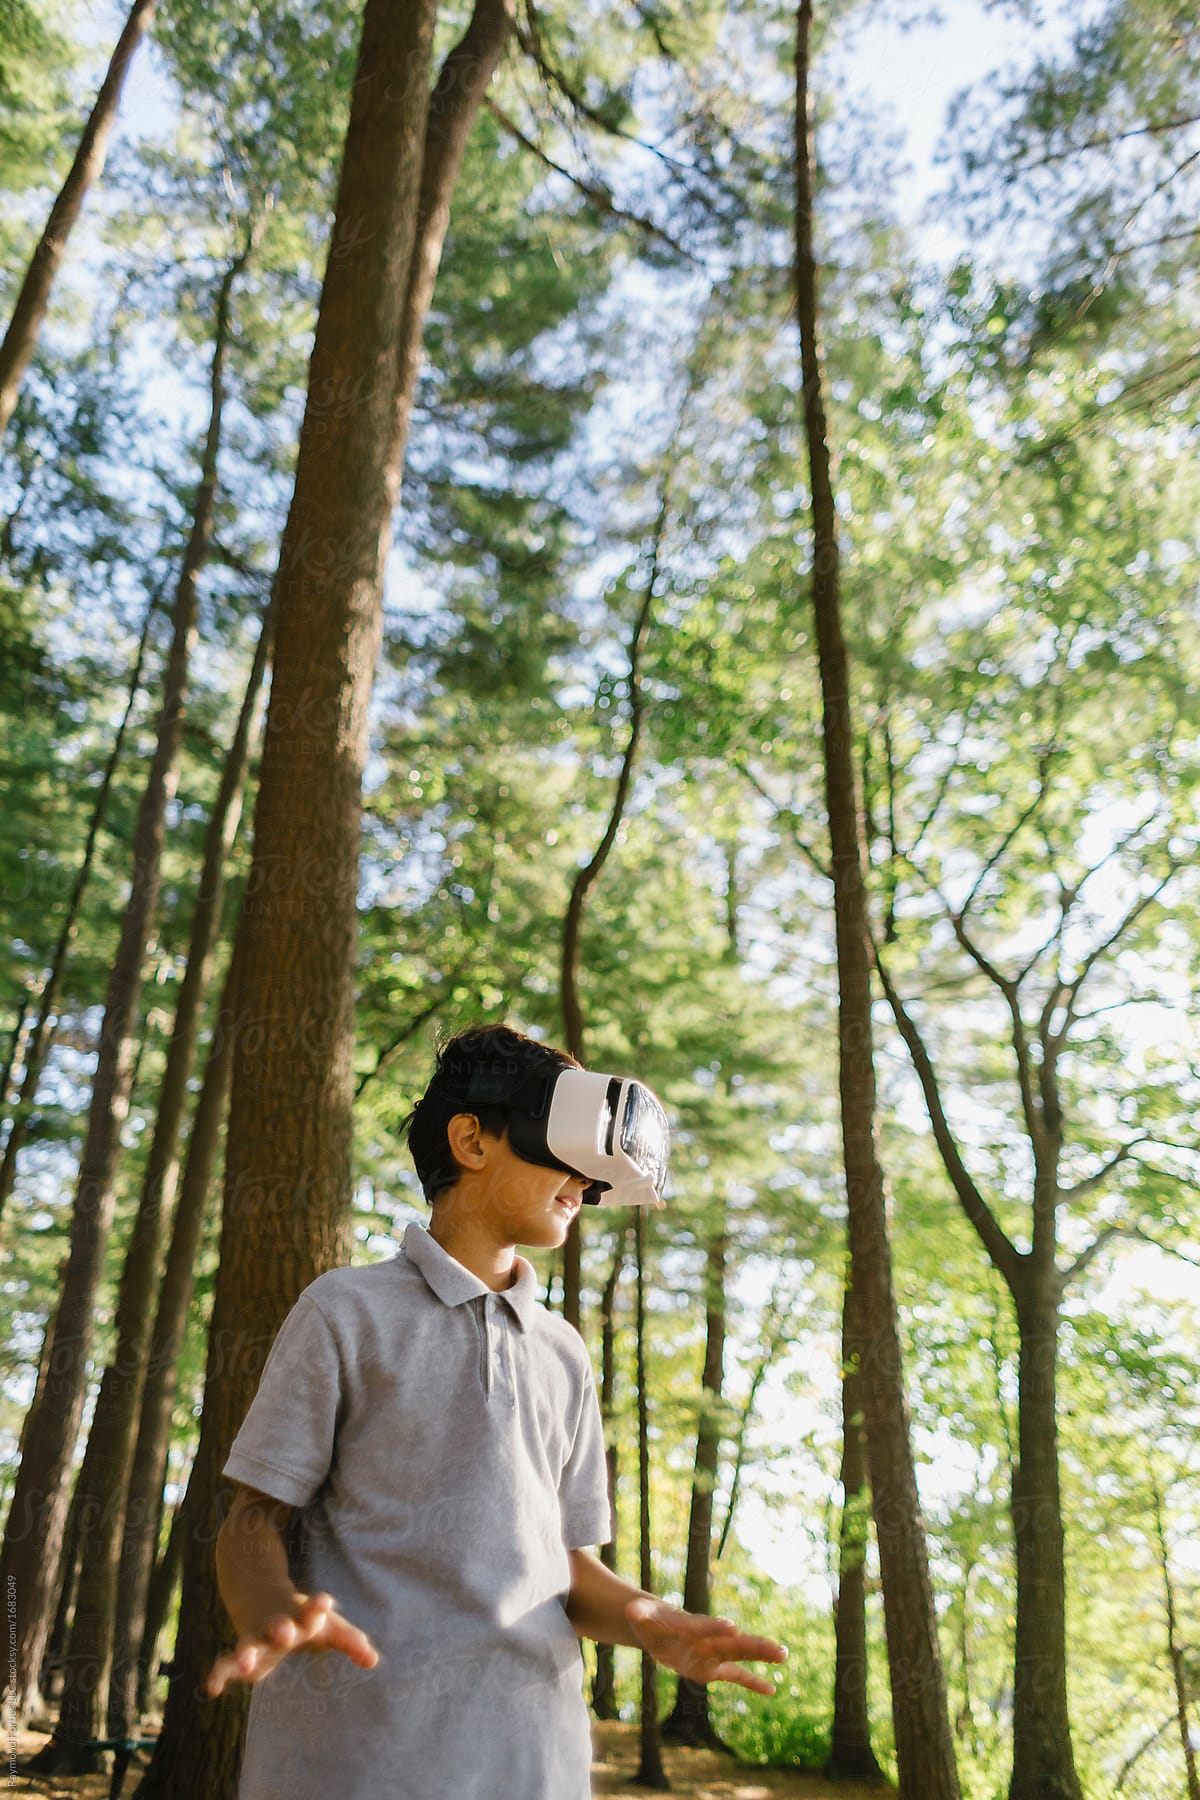 Boy Outside with Virtual Reality Headset